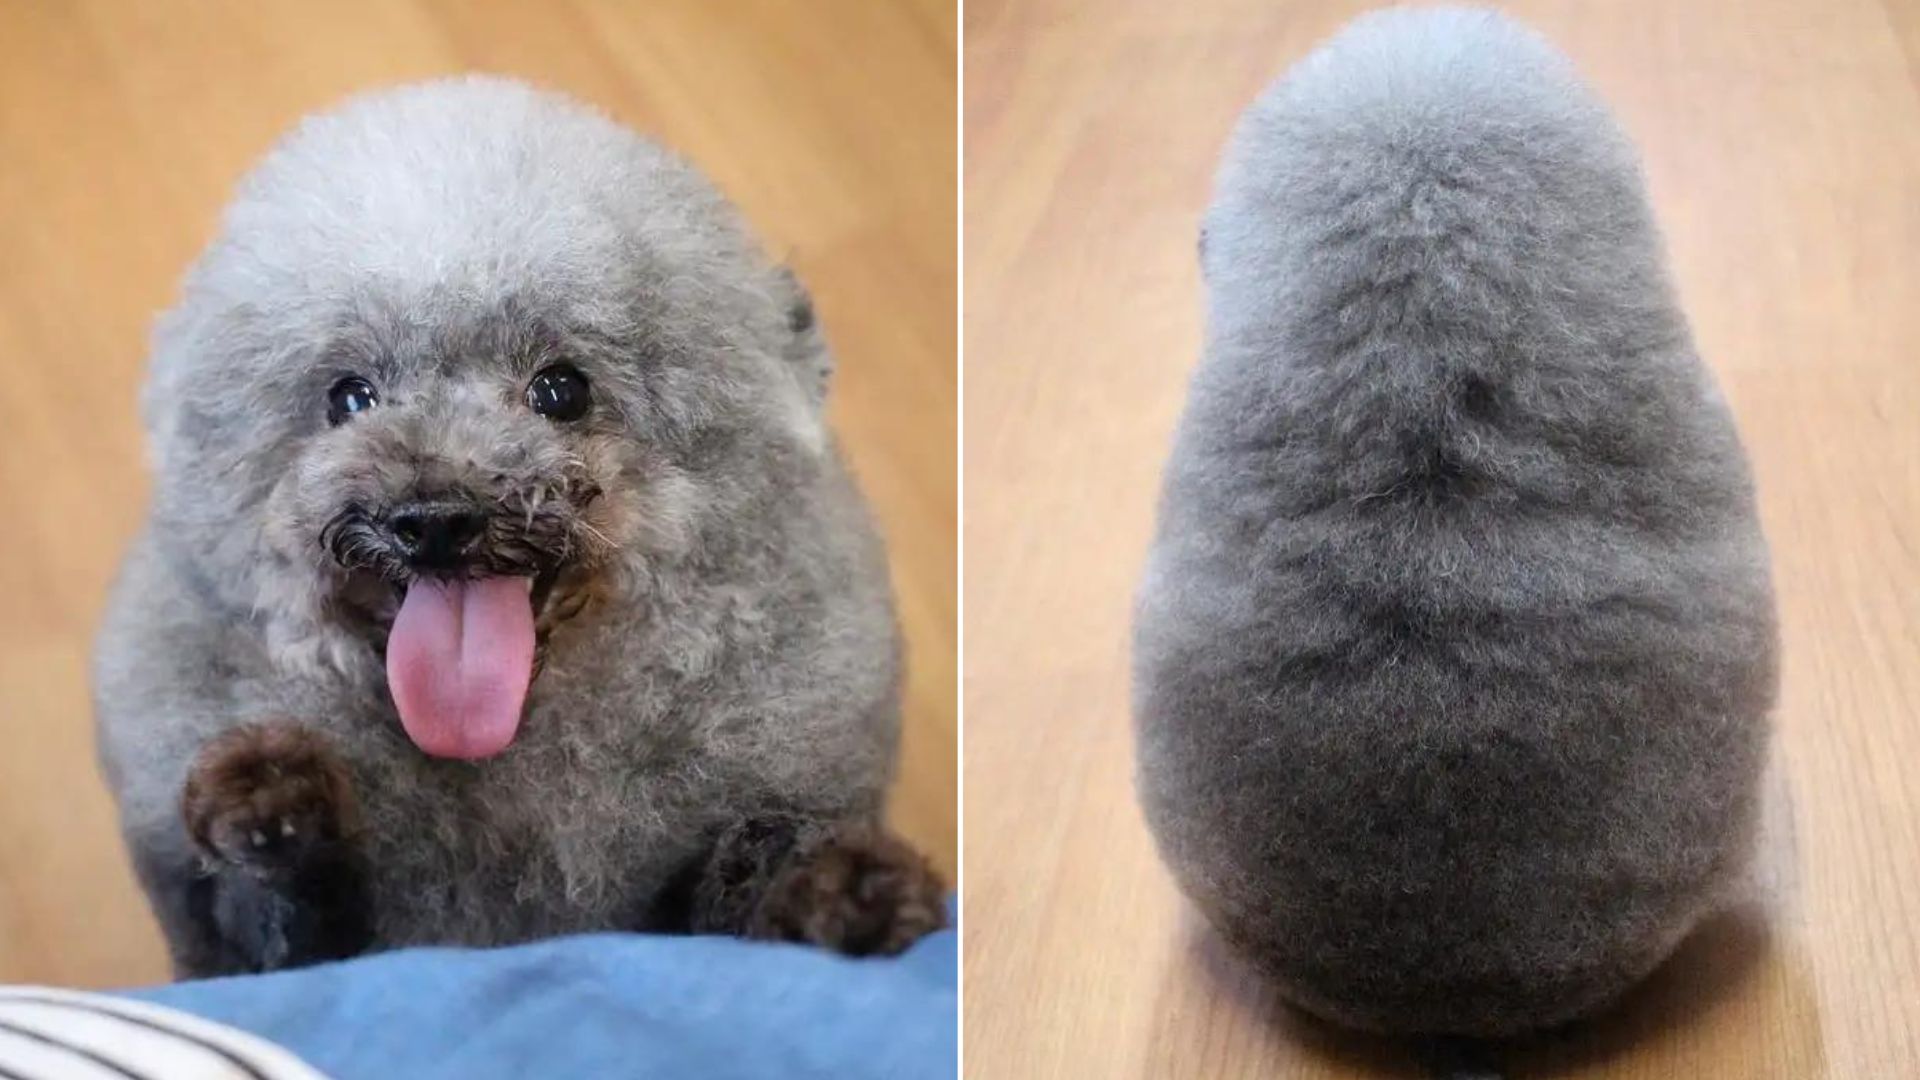 This Adorable Doggo Steals Everyone’s Hearts With His Sheep-Like Appearance